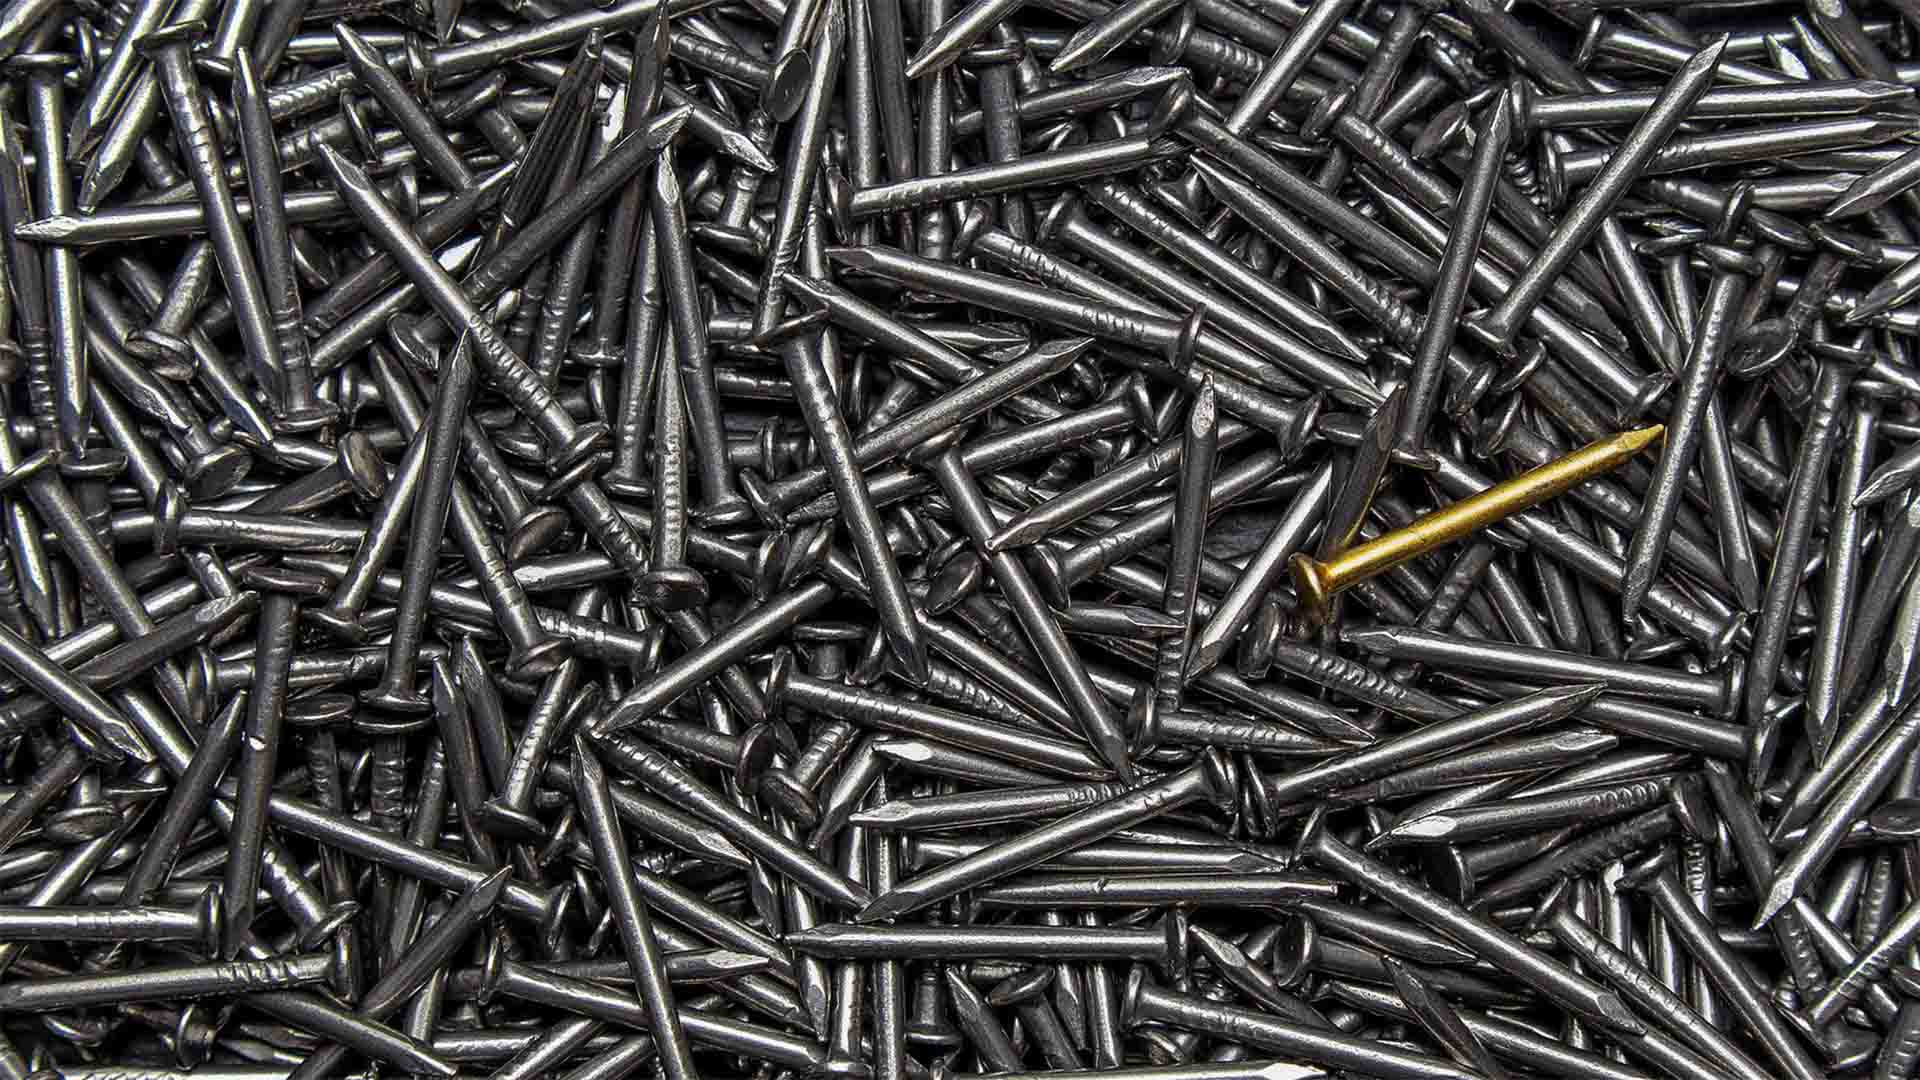 a nail that is non-conforming to the material specification of the other nails